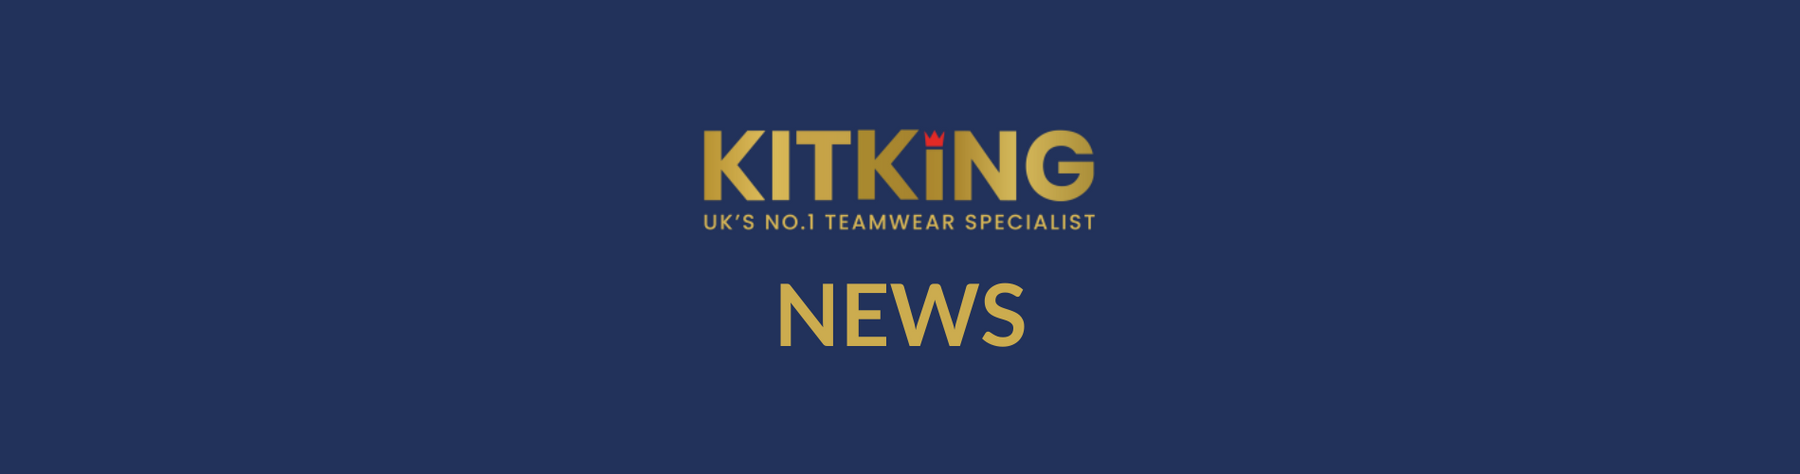 Kitking partners with Canterbury to become Durham Cricket’s official kit supplier ahead of the 2022 season.